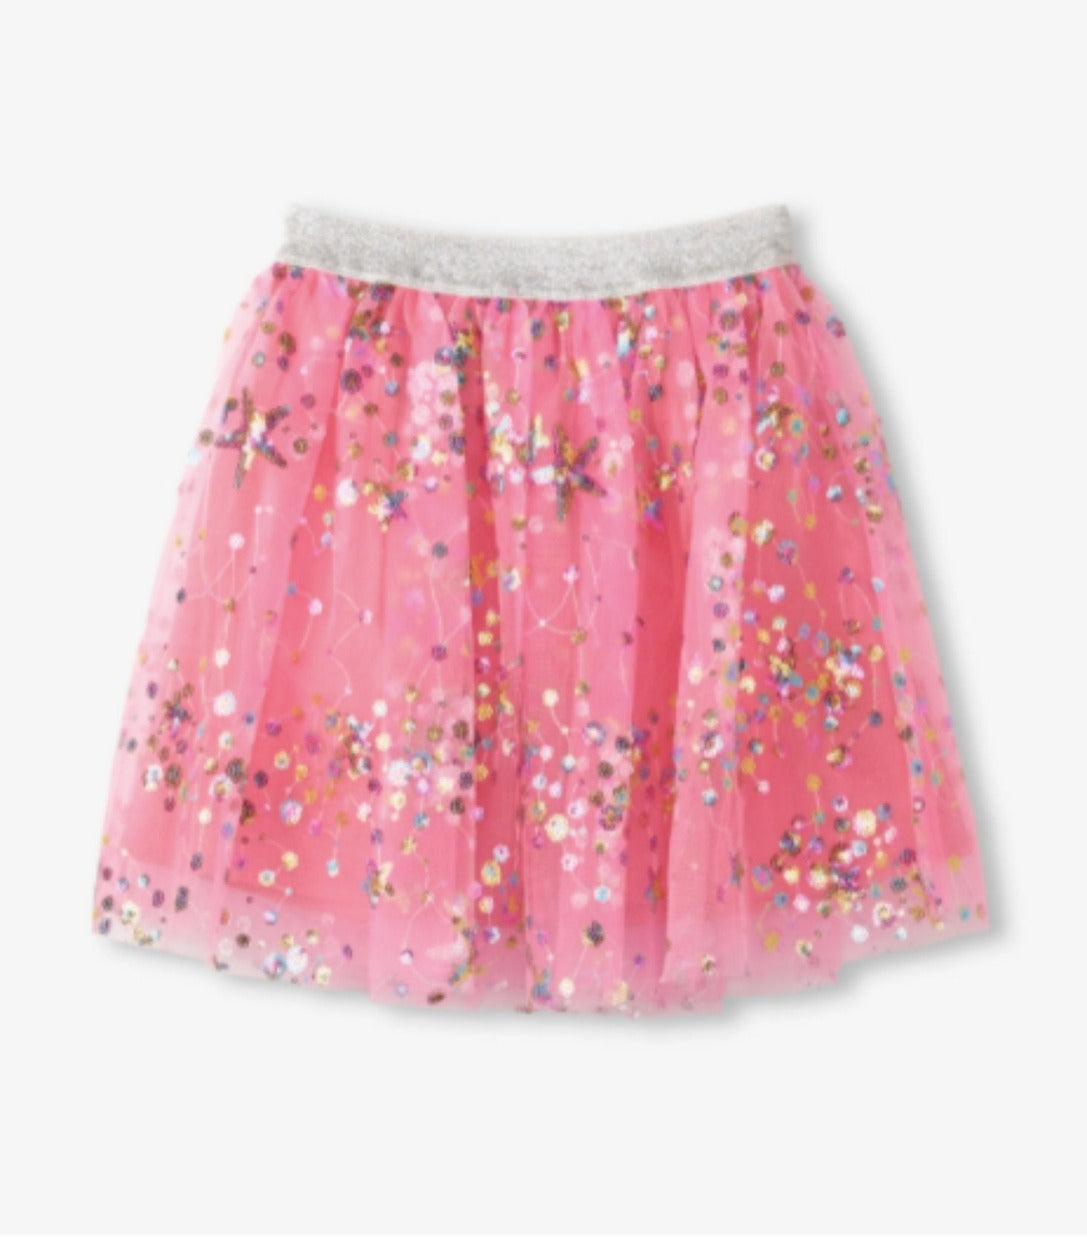 Sequined Skirt - Bright pink - Kids